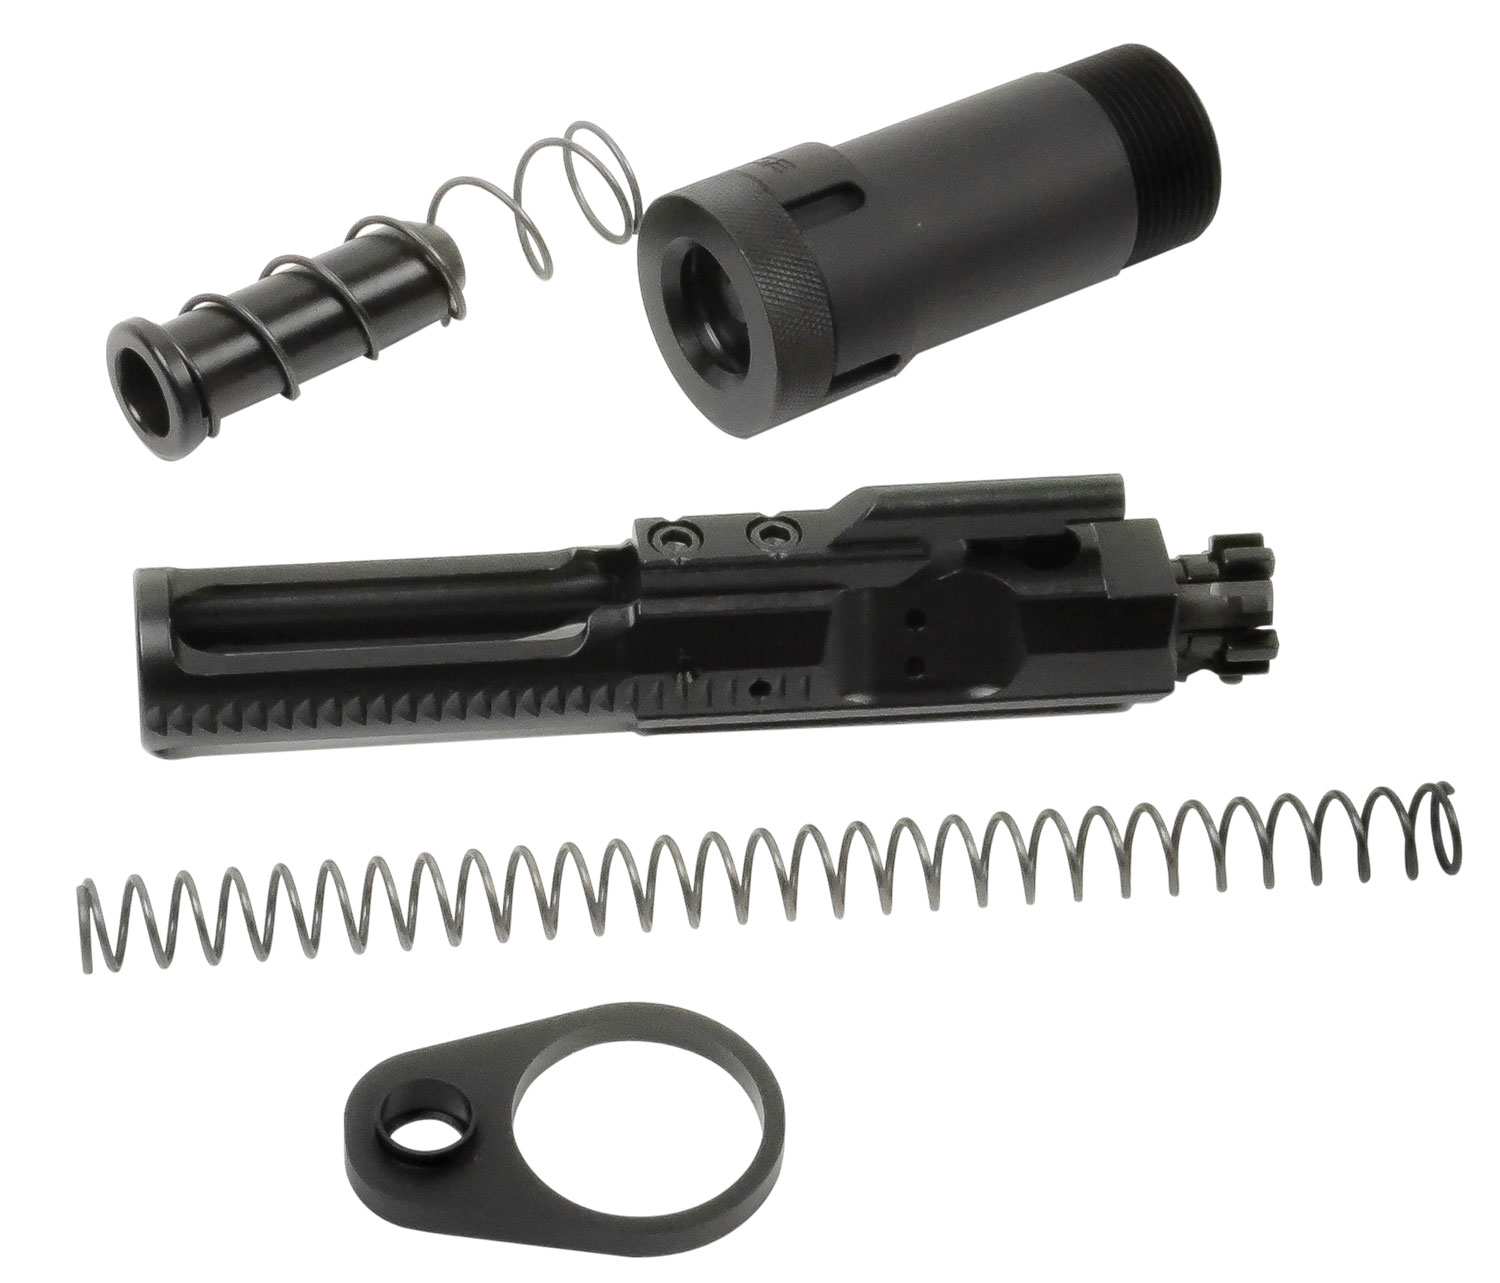 Dead Foot MCSPKRCBN1 Modified Cycle System AR Pistol Kit Bolt Carrier Group Black